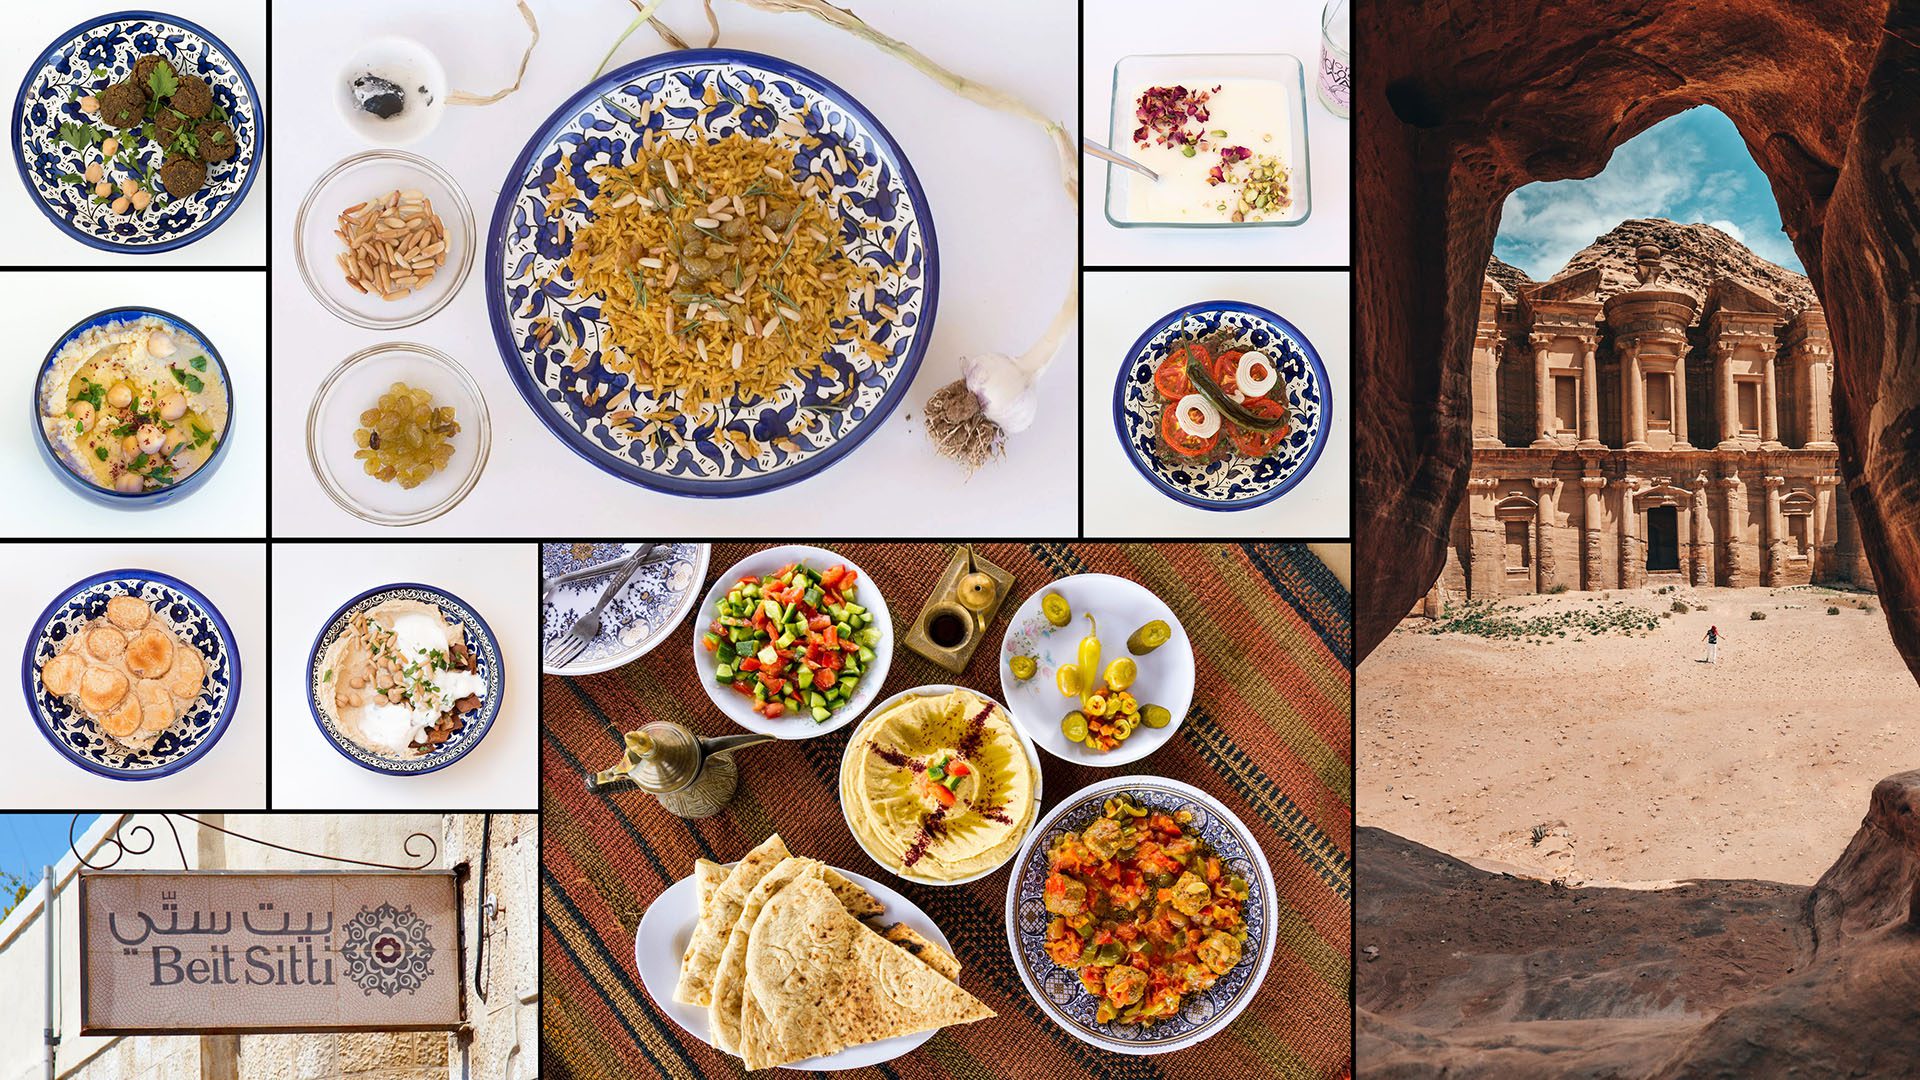 Savour The Flavours Of Jordan: A Grandma’s Recipe Cooking Experience At Beit Sitti